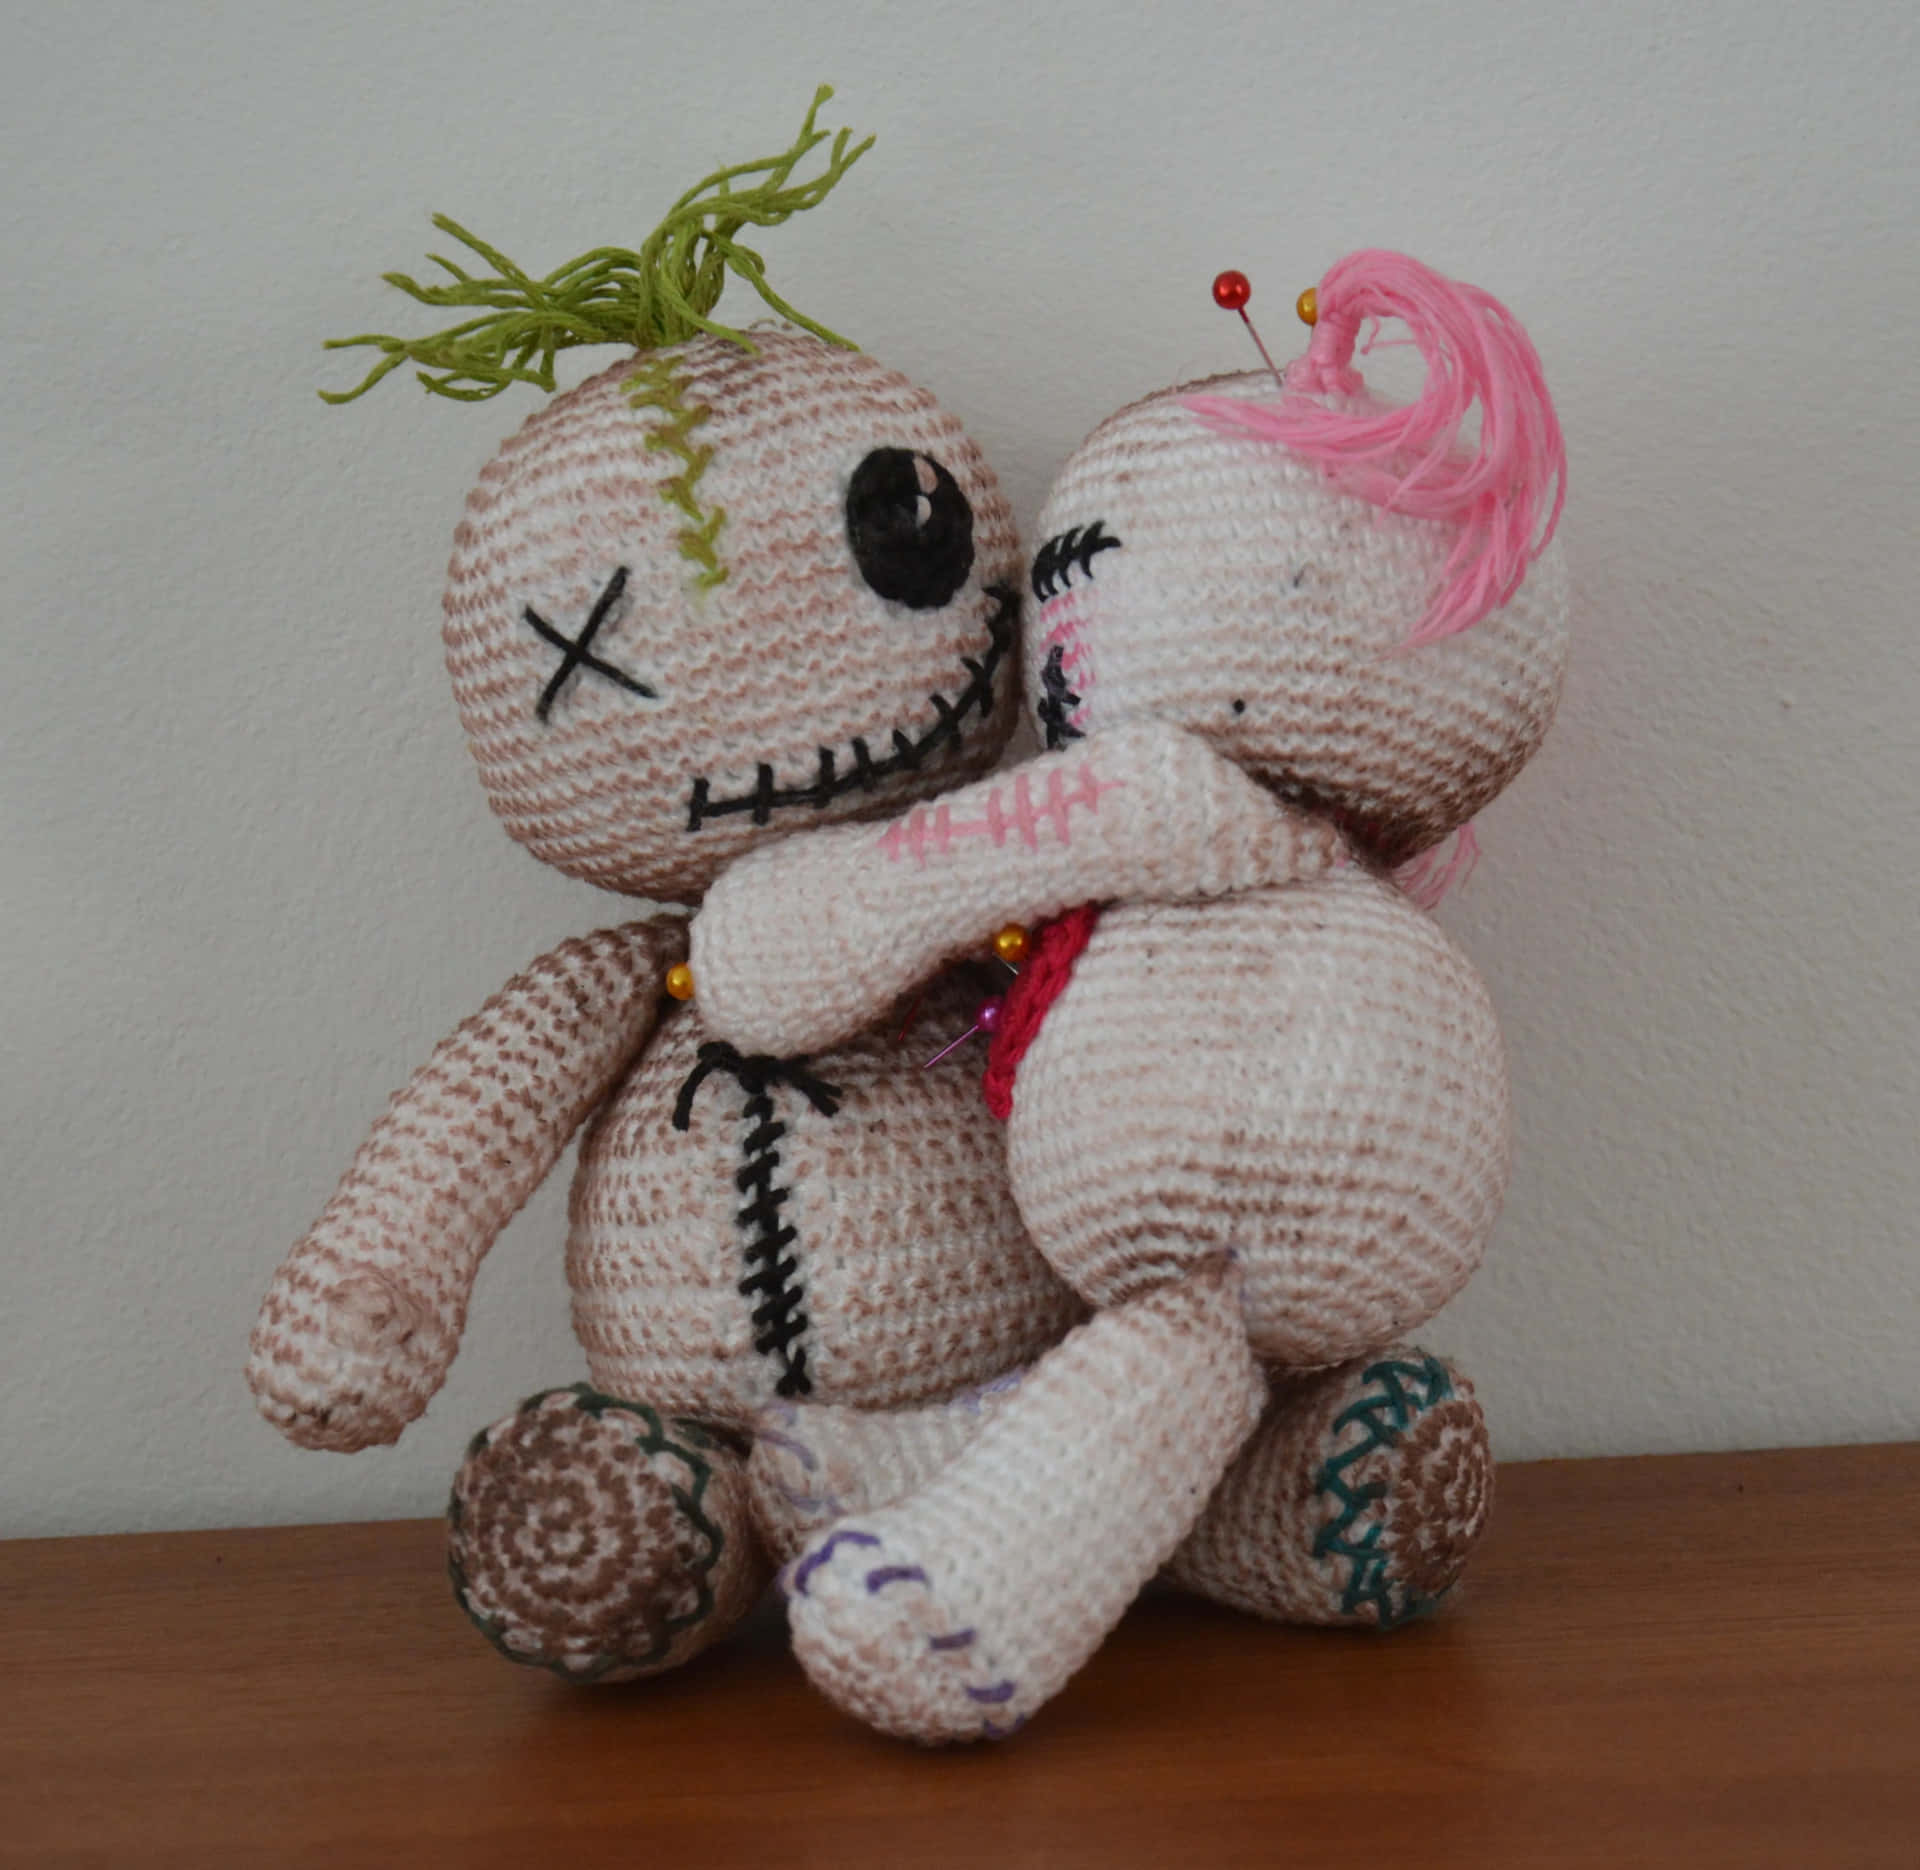 Mysterious Voodoo Doll Handcrafted with Care Wallpaper